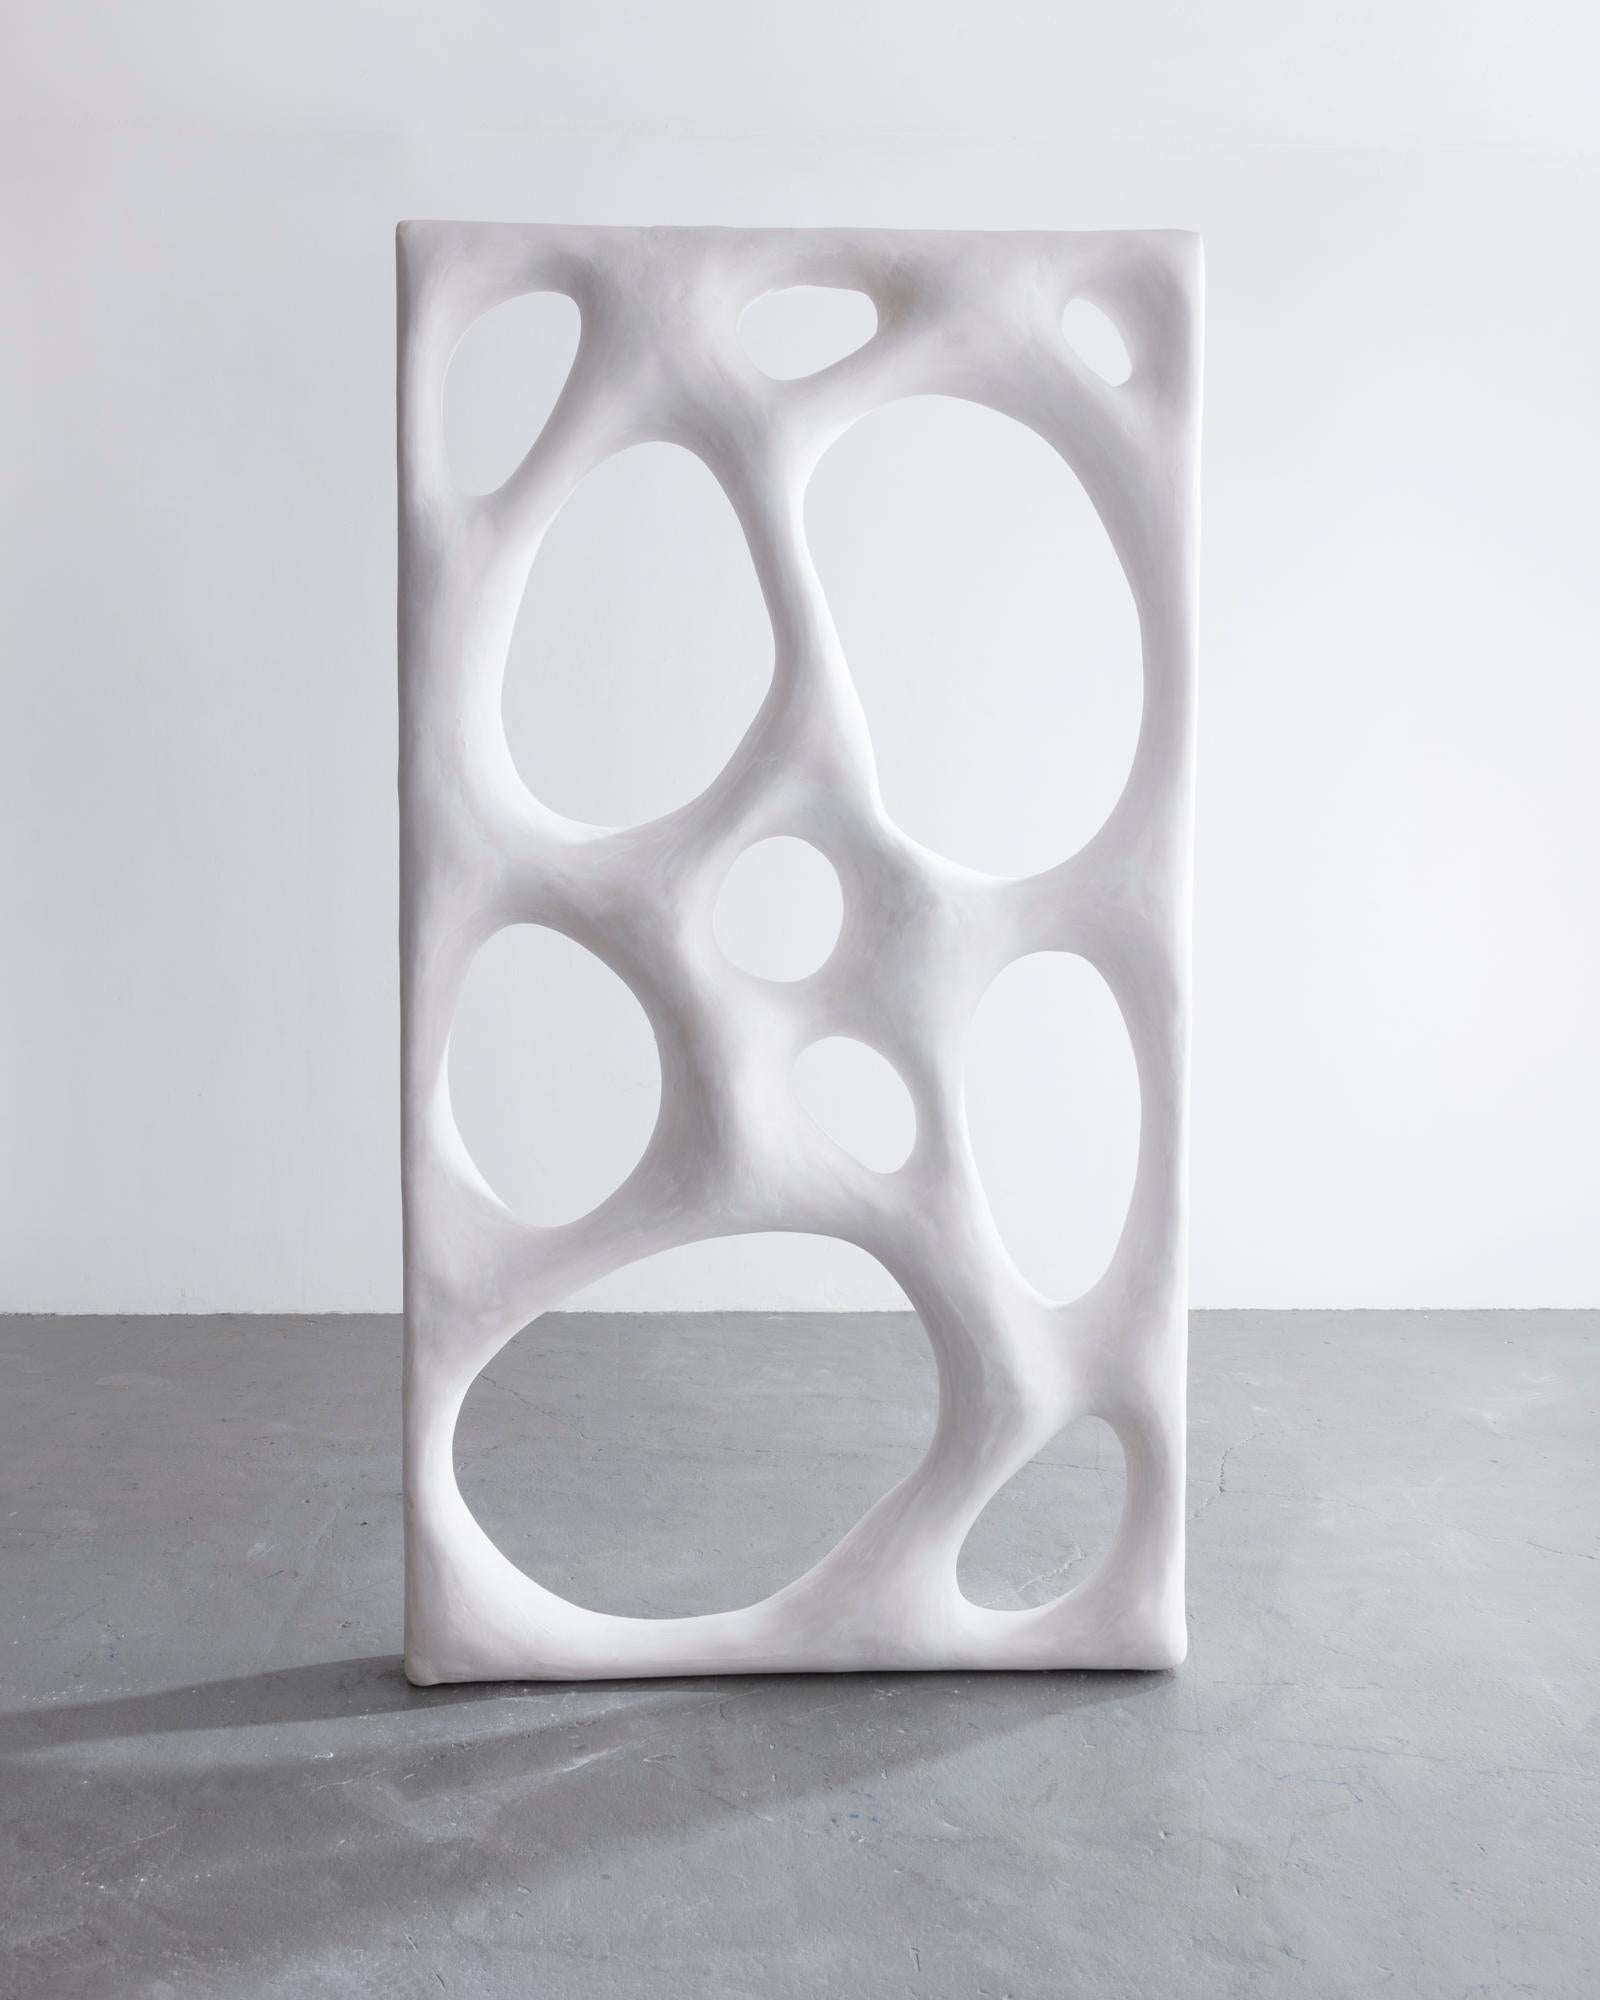 Unique sculptural room divider. Designed and made by Rogan Gregory, USA, 2018.